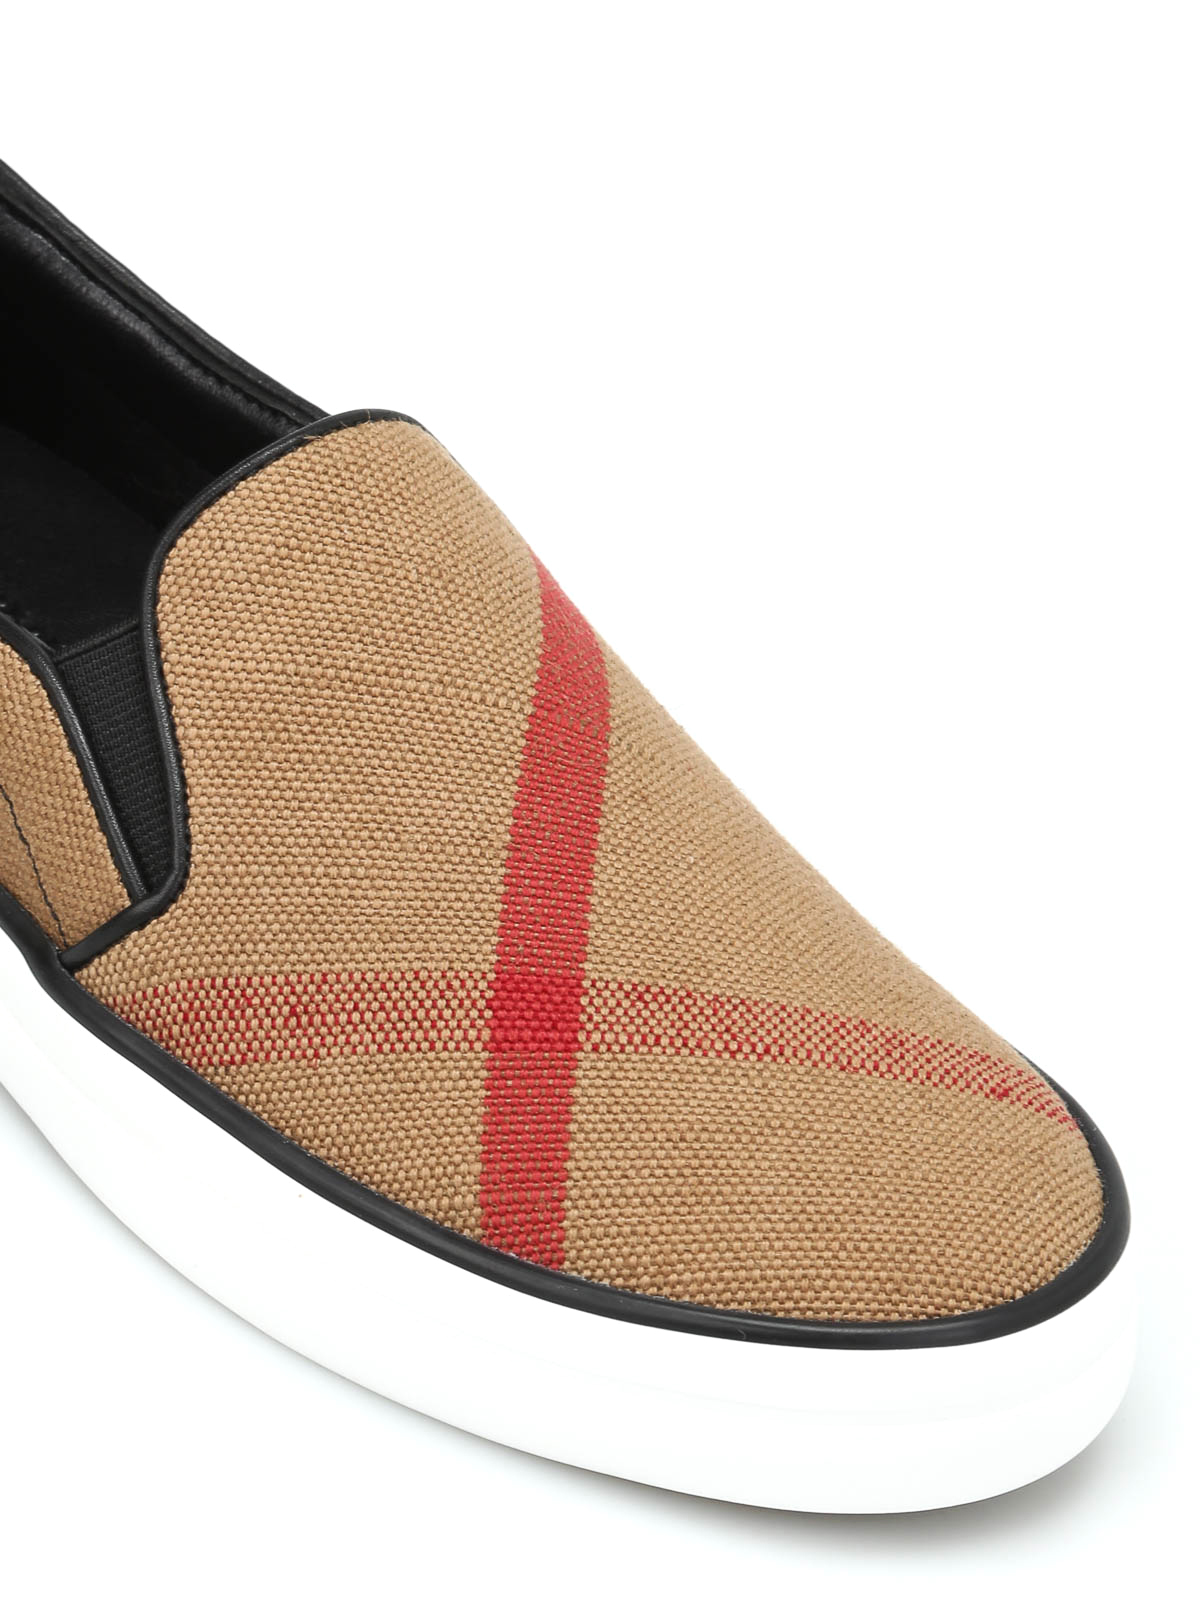 Burberry - Checked canvas slip-ons 